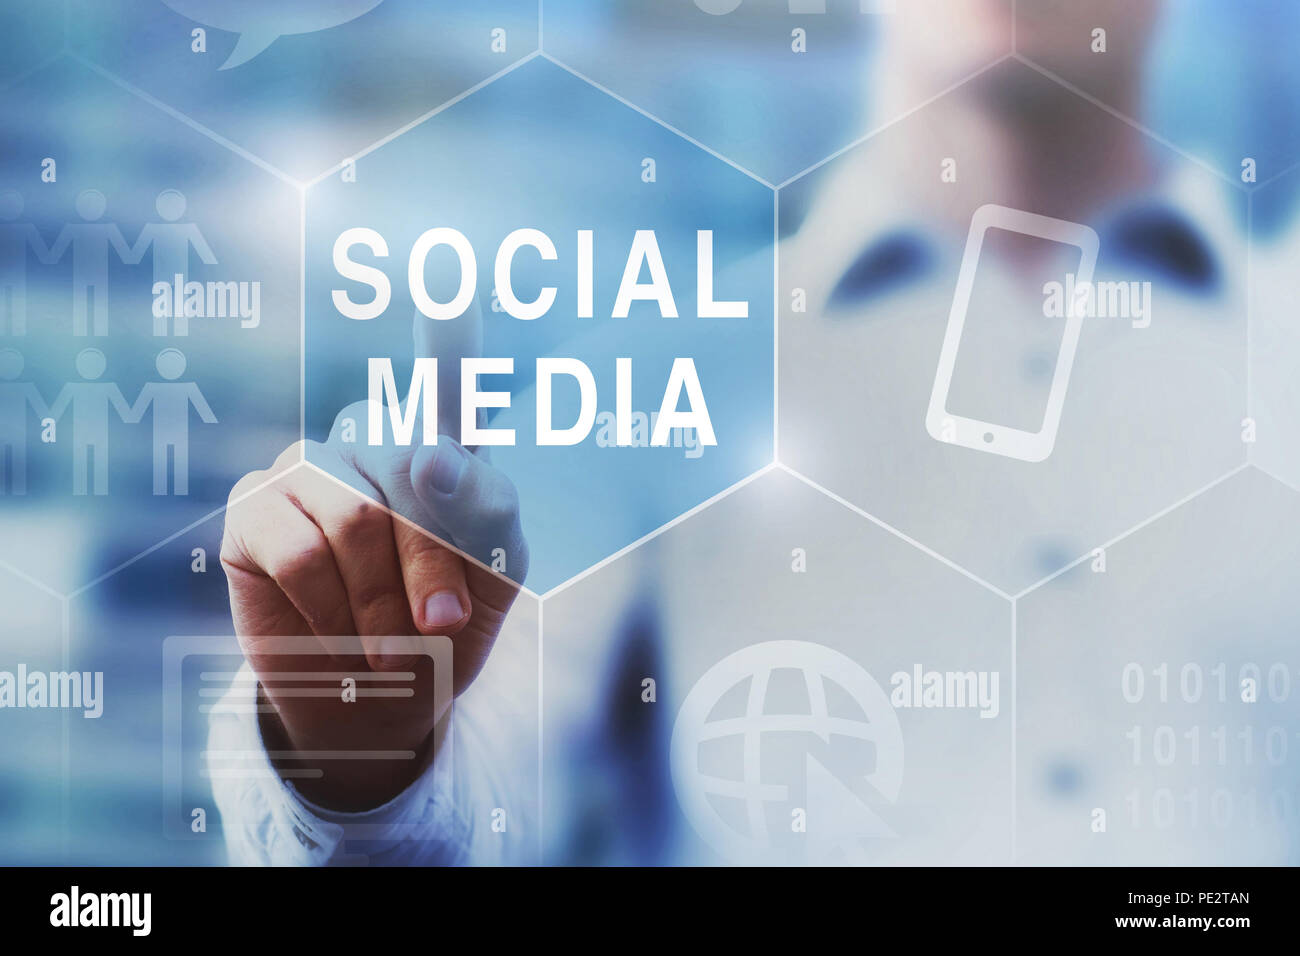 social media concept on touch screen Stock Photo